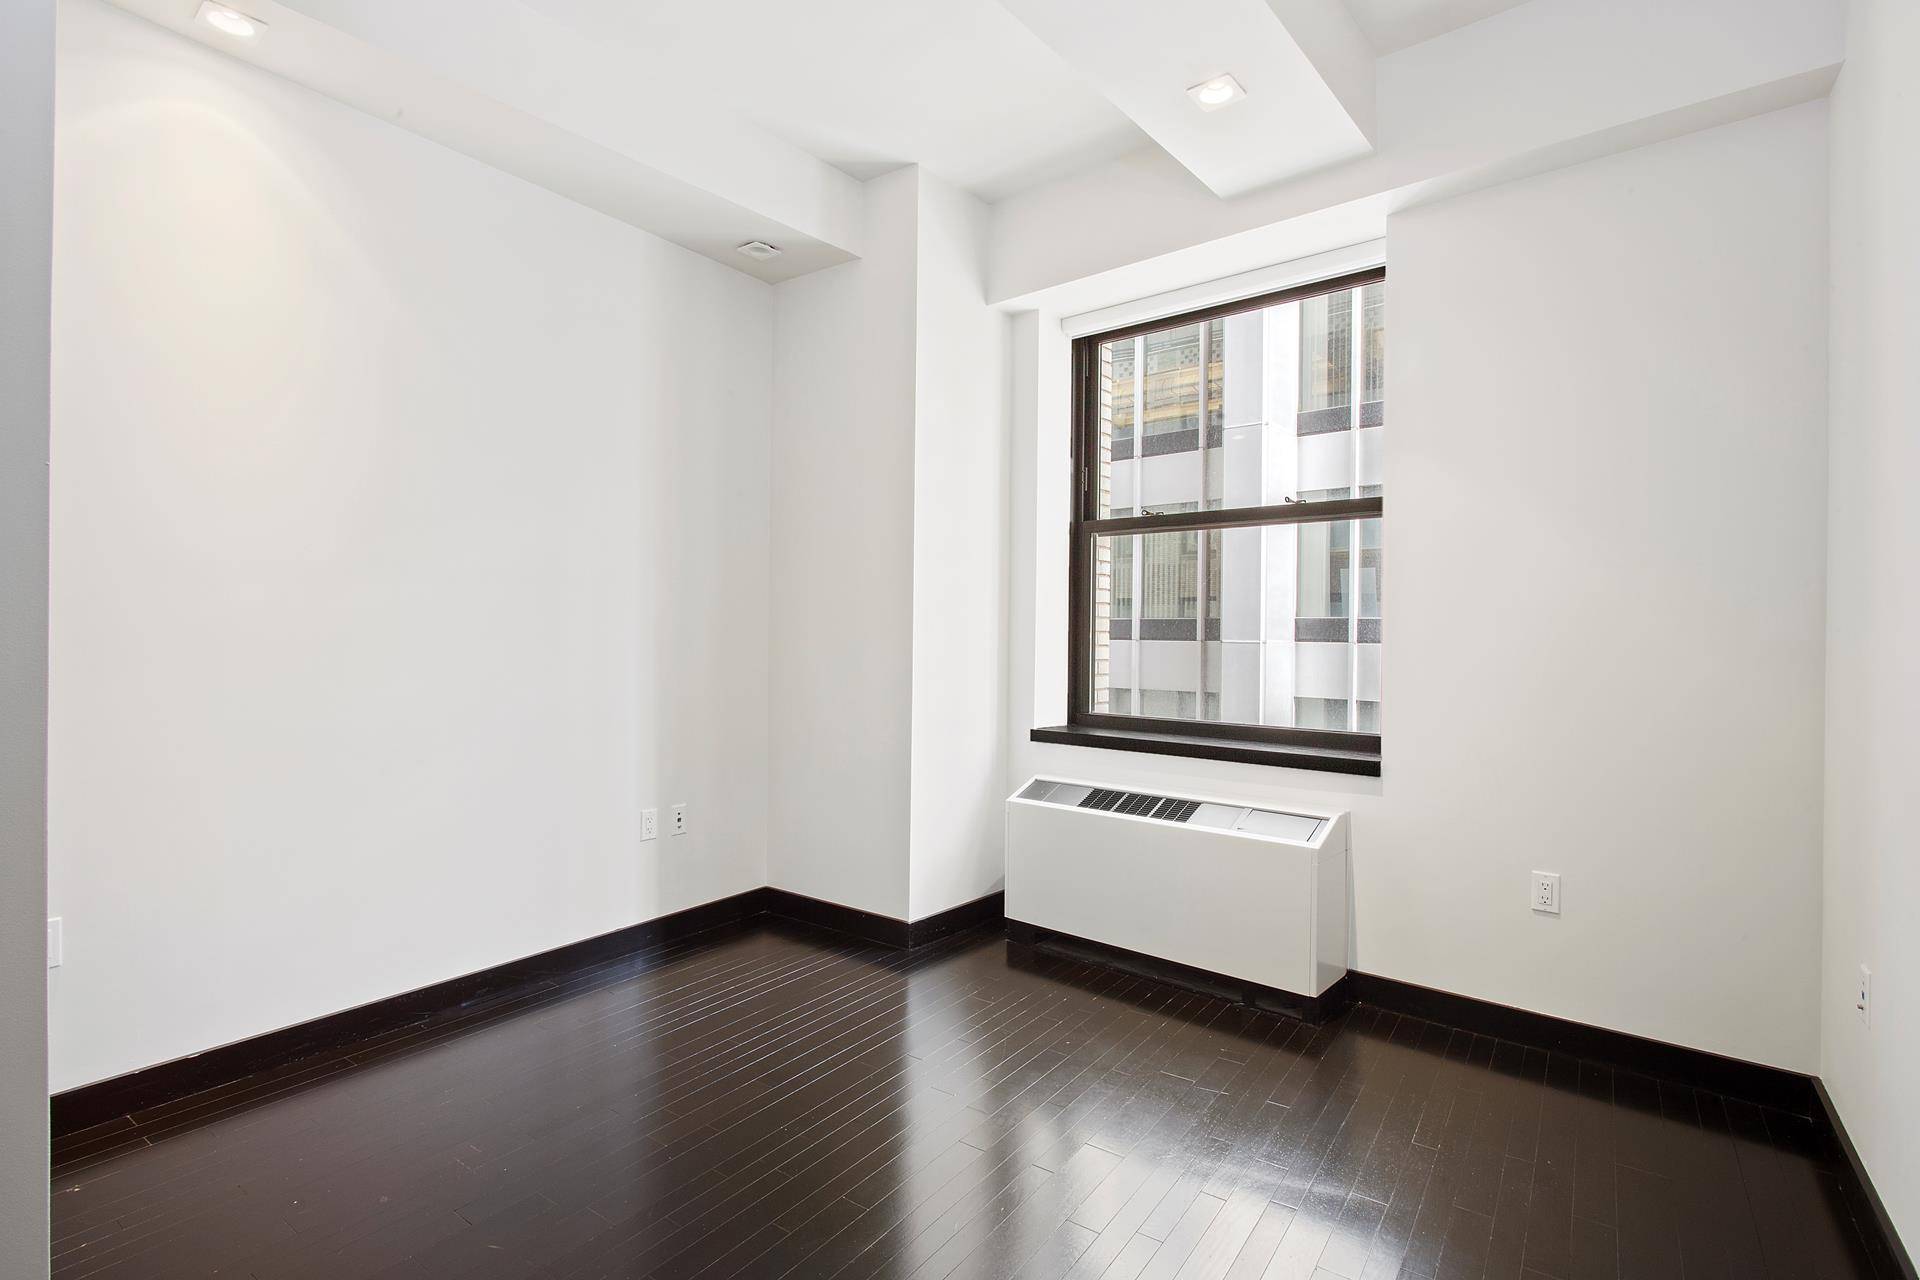 A gorgeous two bedroom, two bath corner unit with incredible northern and eastern exposure situated in what is considered one of the most luxurious condominiums in Lower Manhattan.